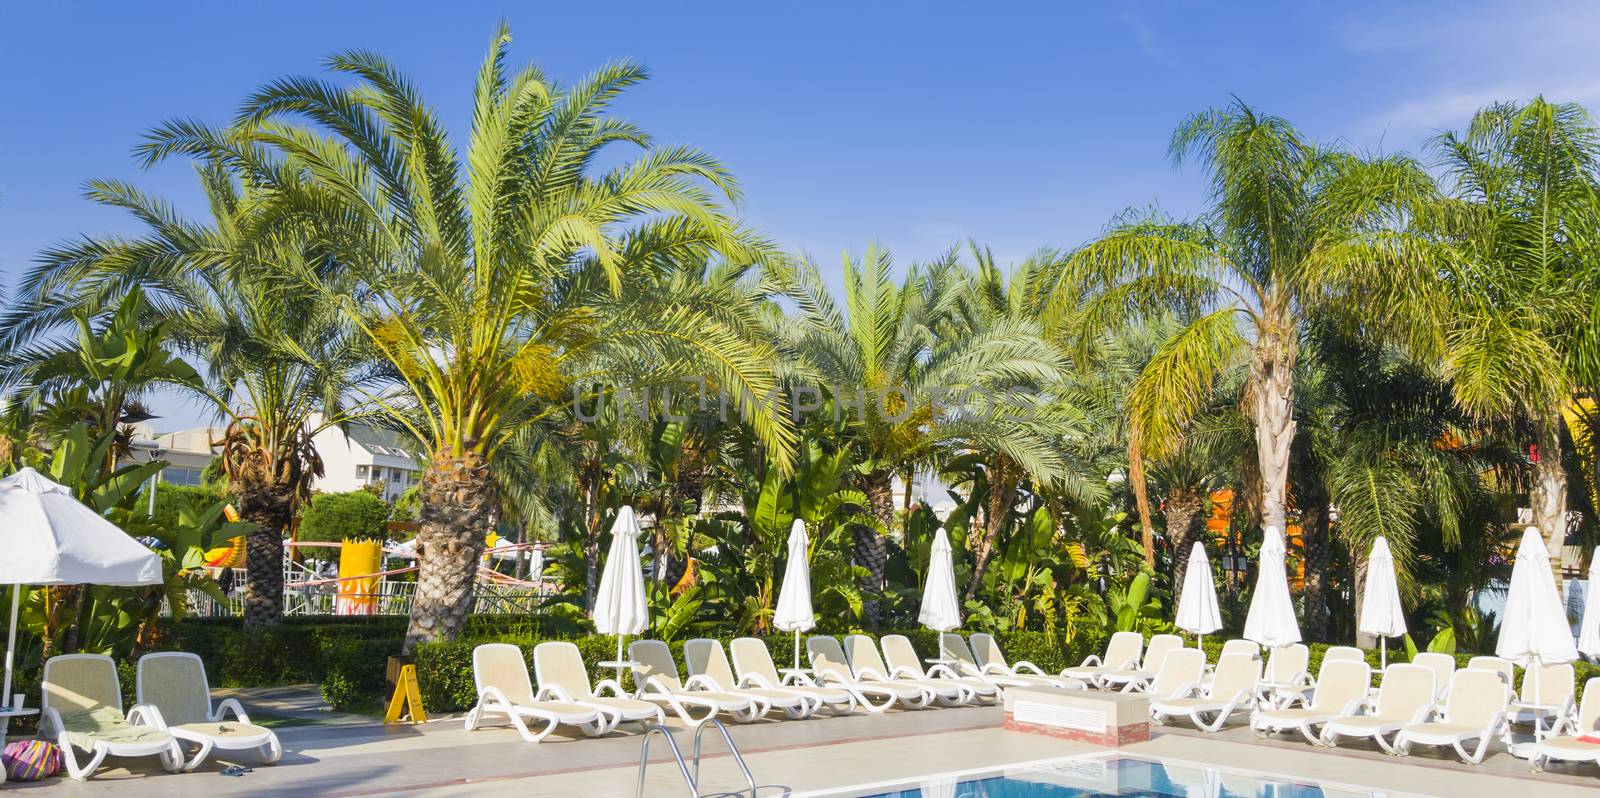 Holiday summer resort on mediterranean beach: swimming pool  and palms in the garden